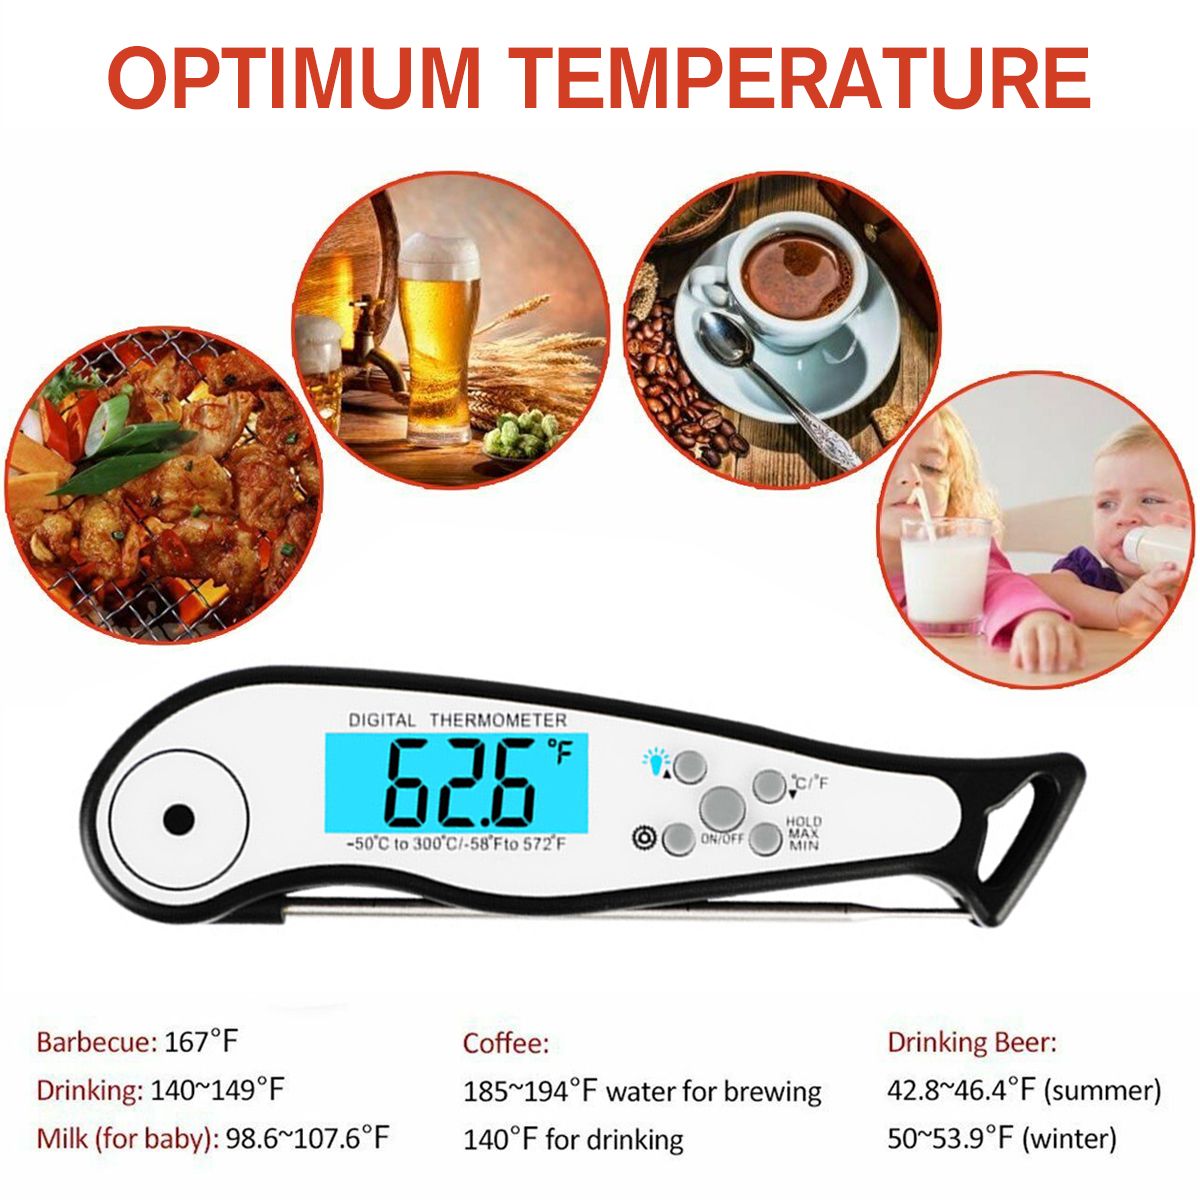 Meat-Thermometer-Probe-Digital-Grill-Instant-Read-Food-Cooking-Grill-Kitchen-Thermometer-1641702